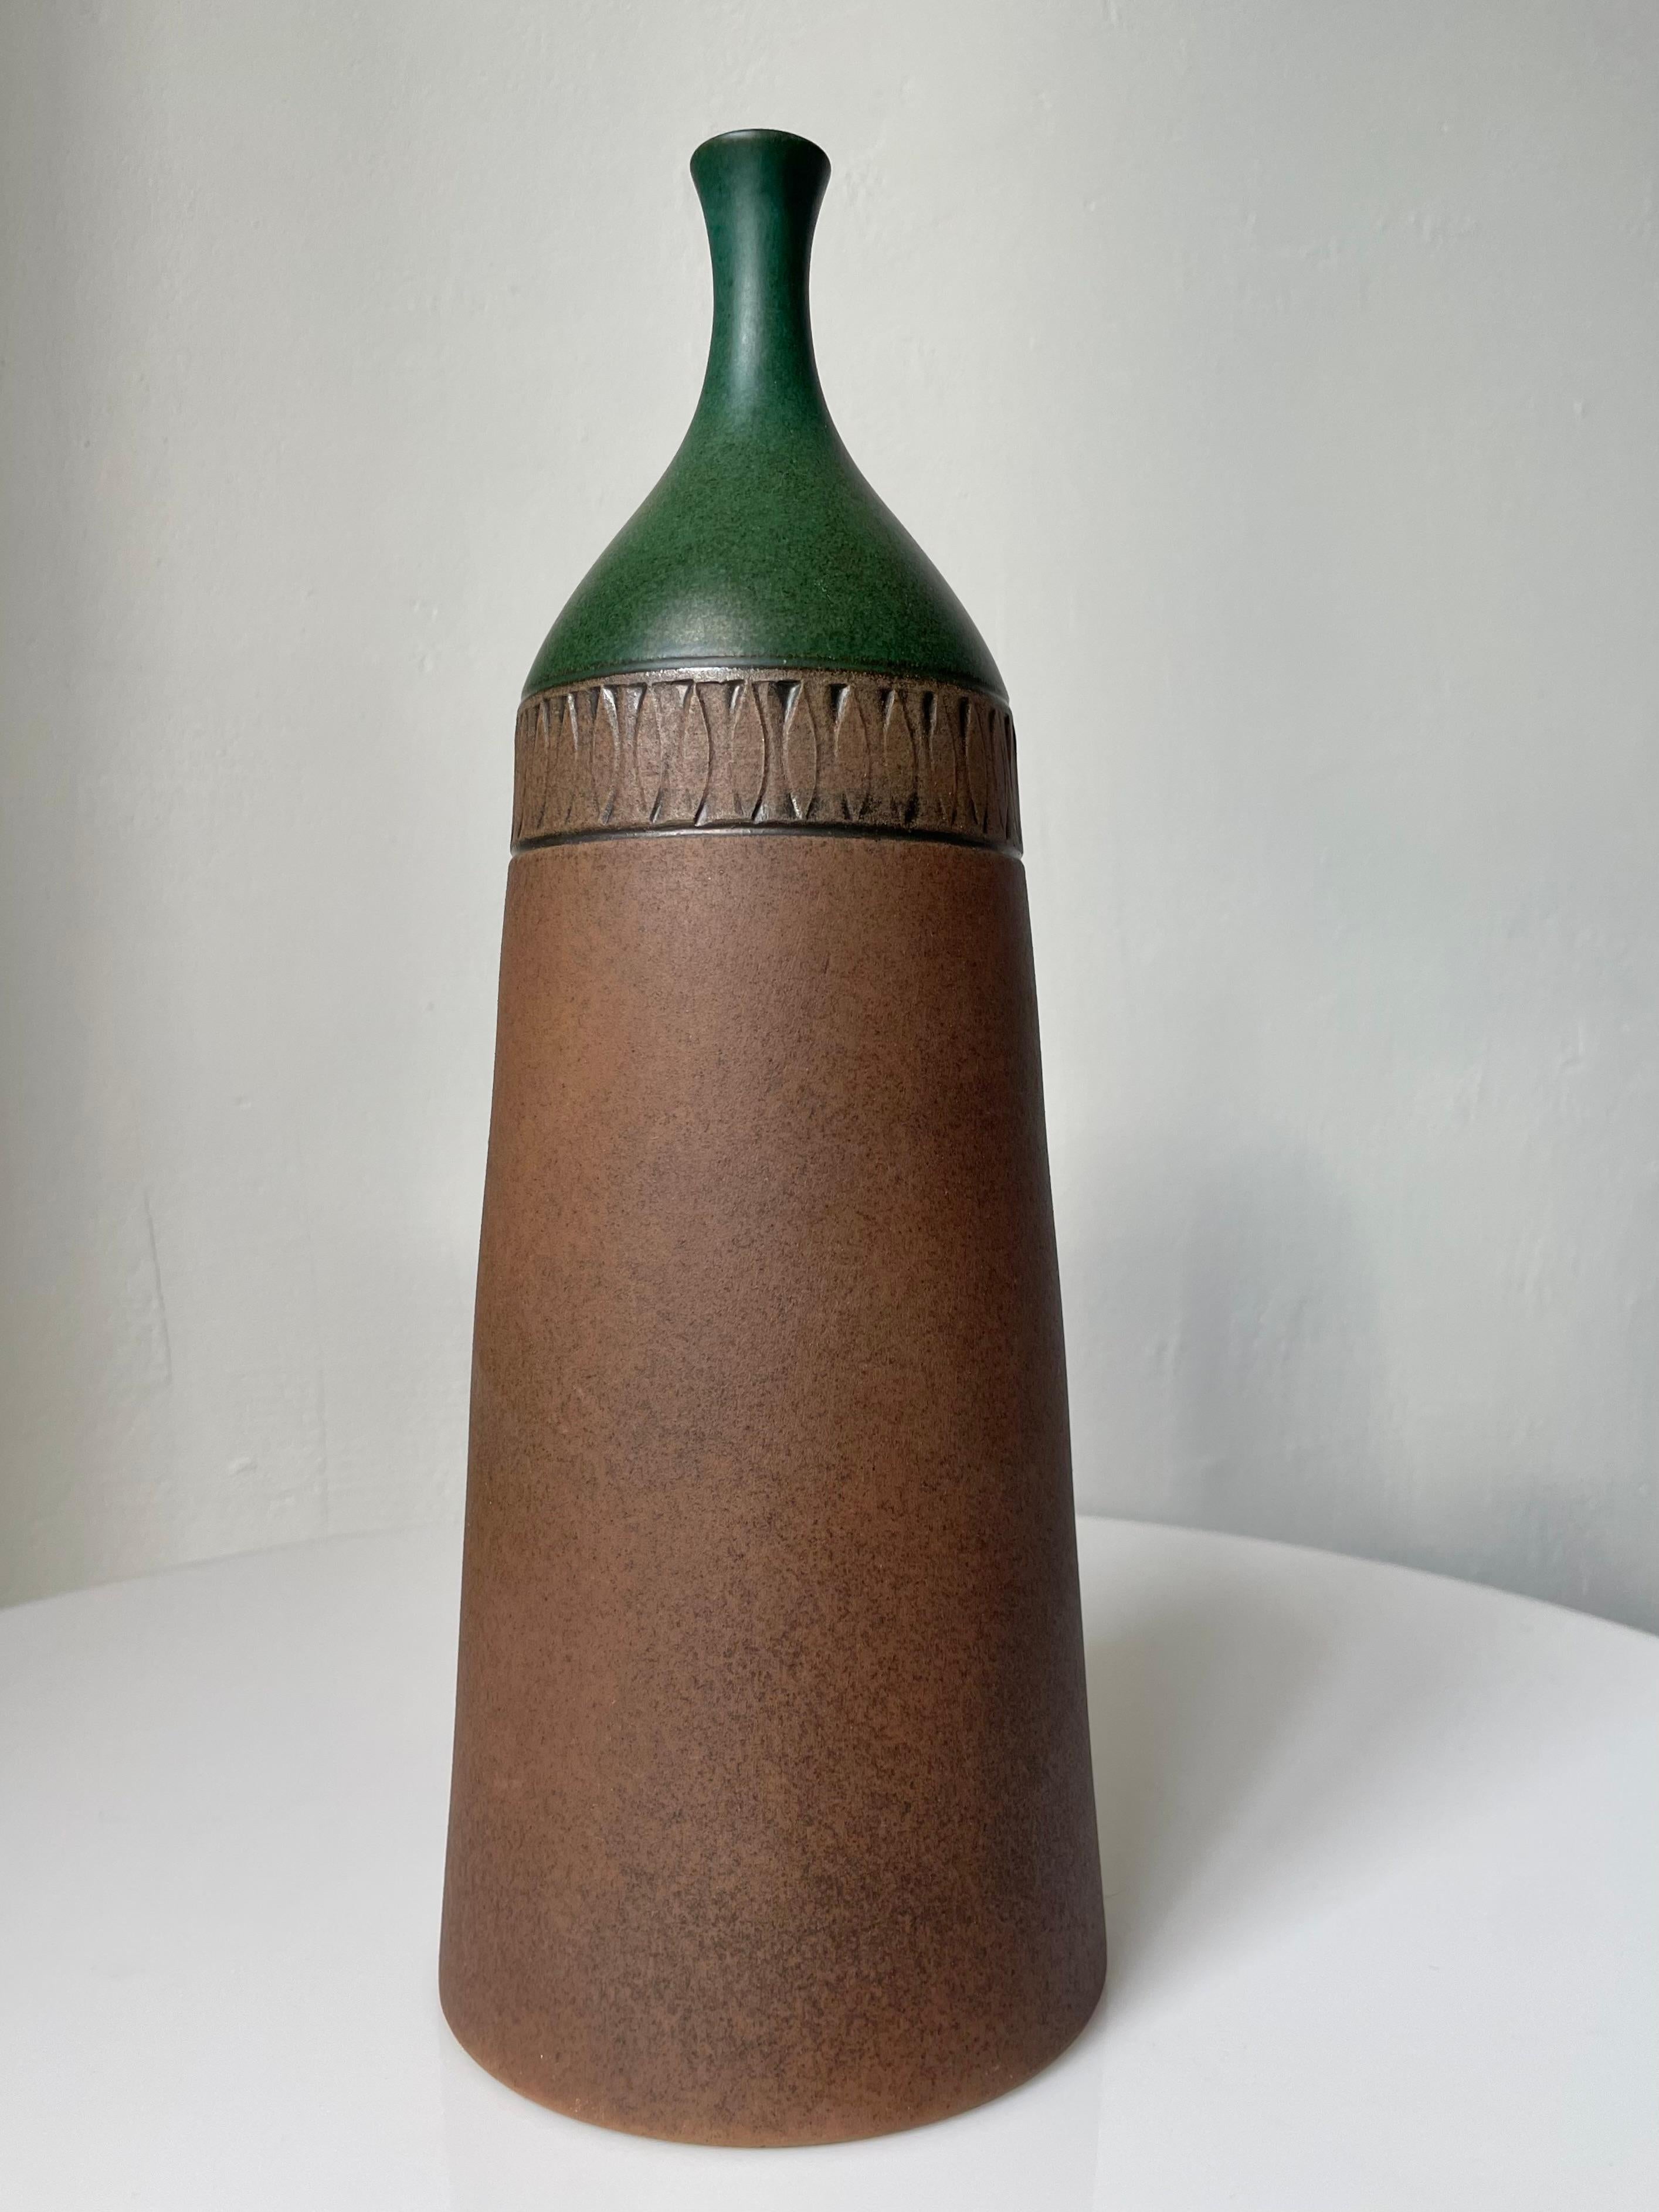 Sculptural tall ceramic bottle vase with wide base and slender glazed neck handmade by ceramic artist Åke Palmgren for Krukmakaren in Ystad in the 1960s. Hand-carved graphic decoration around the top and unusual matte forest green glaze with black